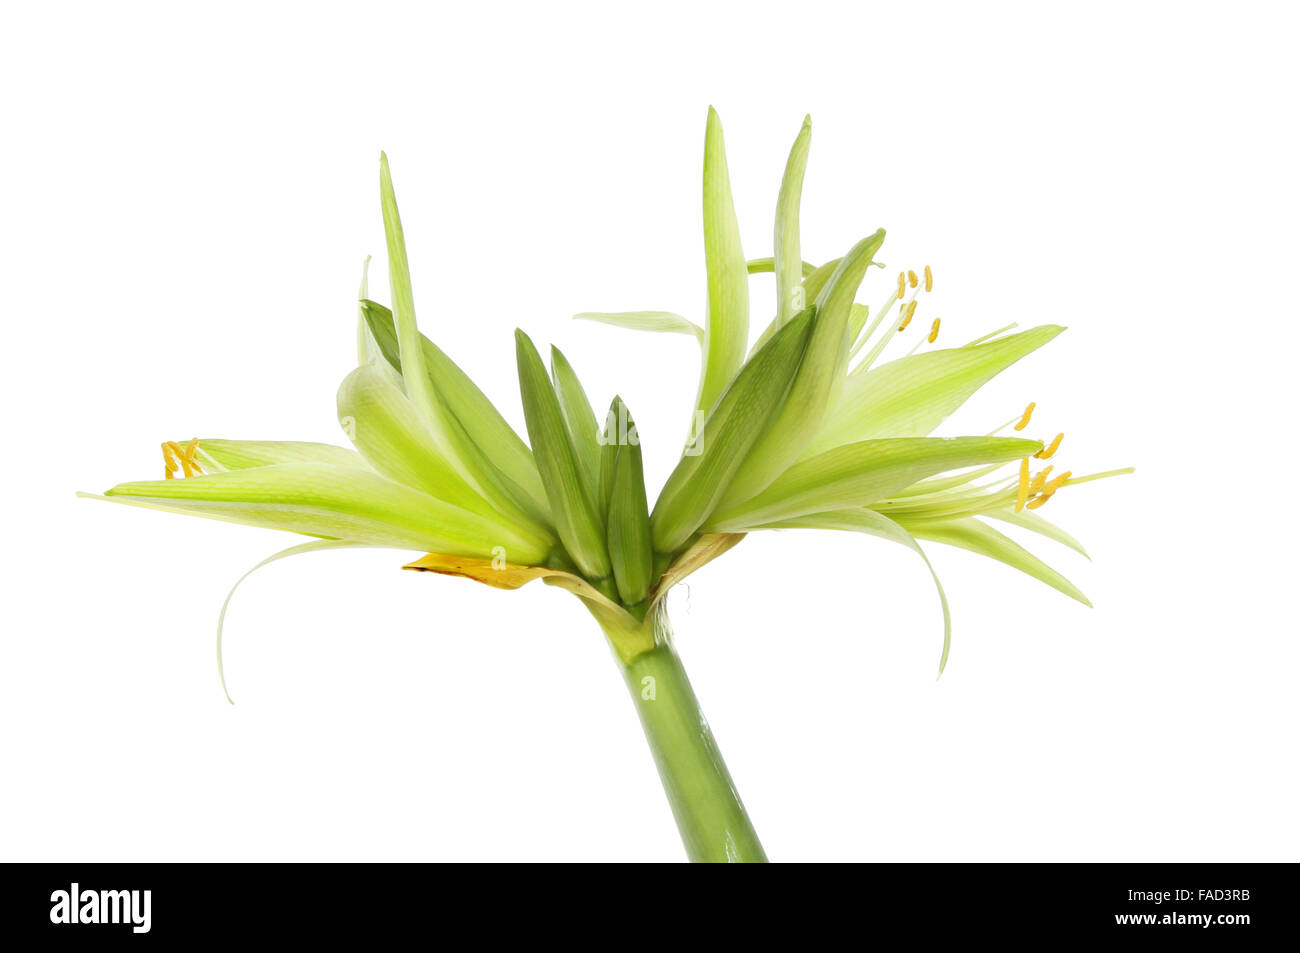 Green Amaryllis flowers and flower buds isolated against white Stock Photo